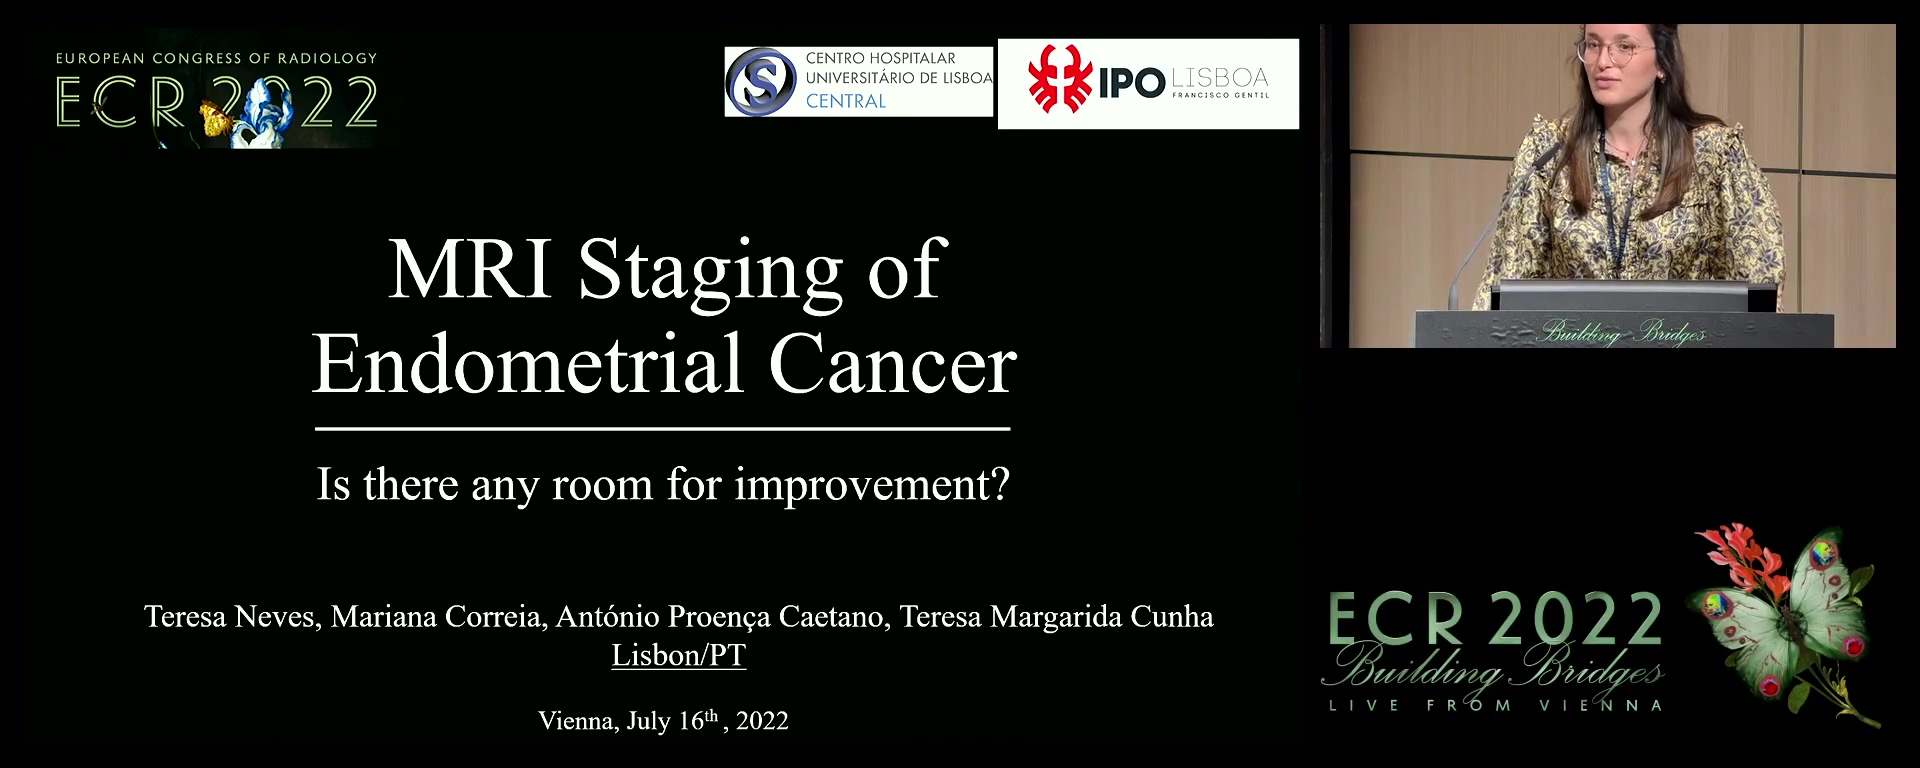 MRI staging of endometrial cancer: is there any room for improvement? - Teresa Neves, Lisbon / PT